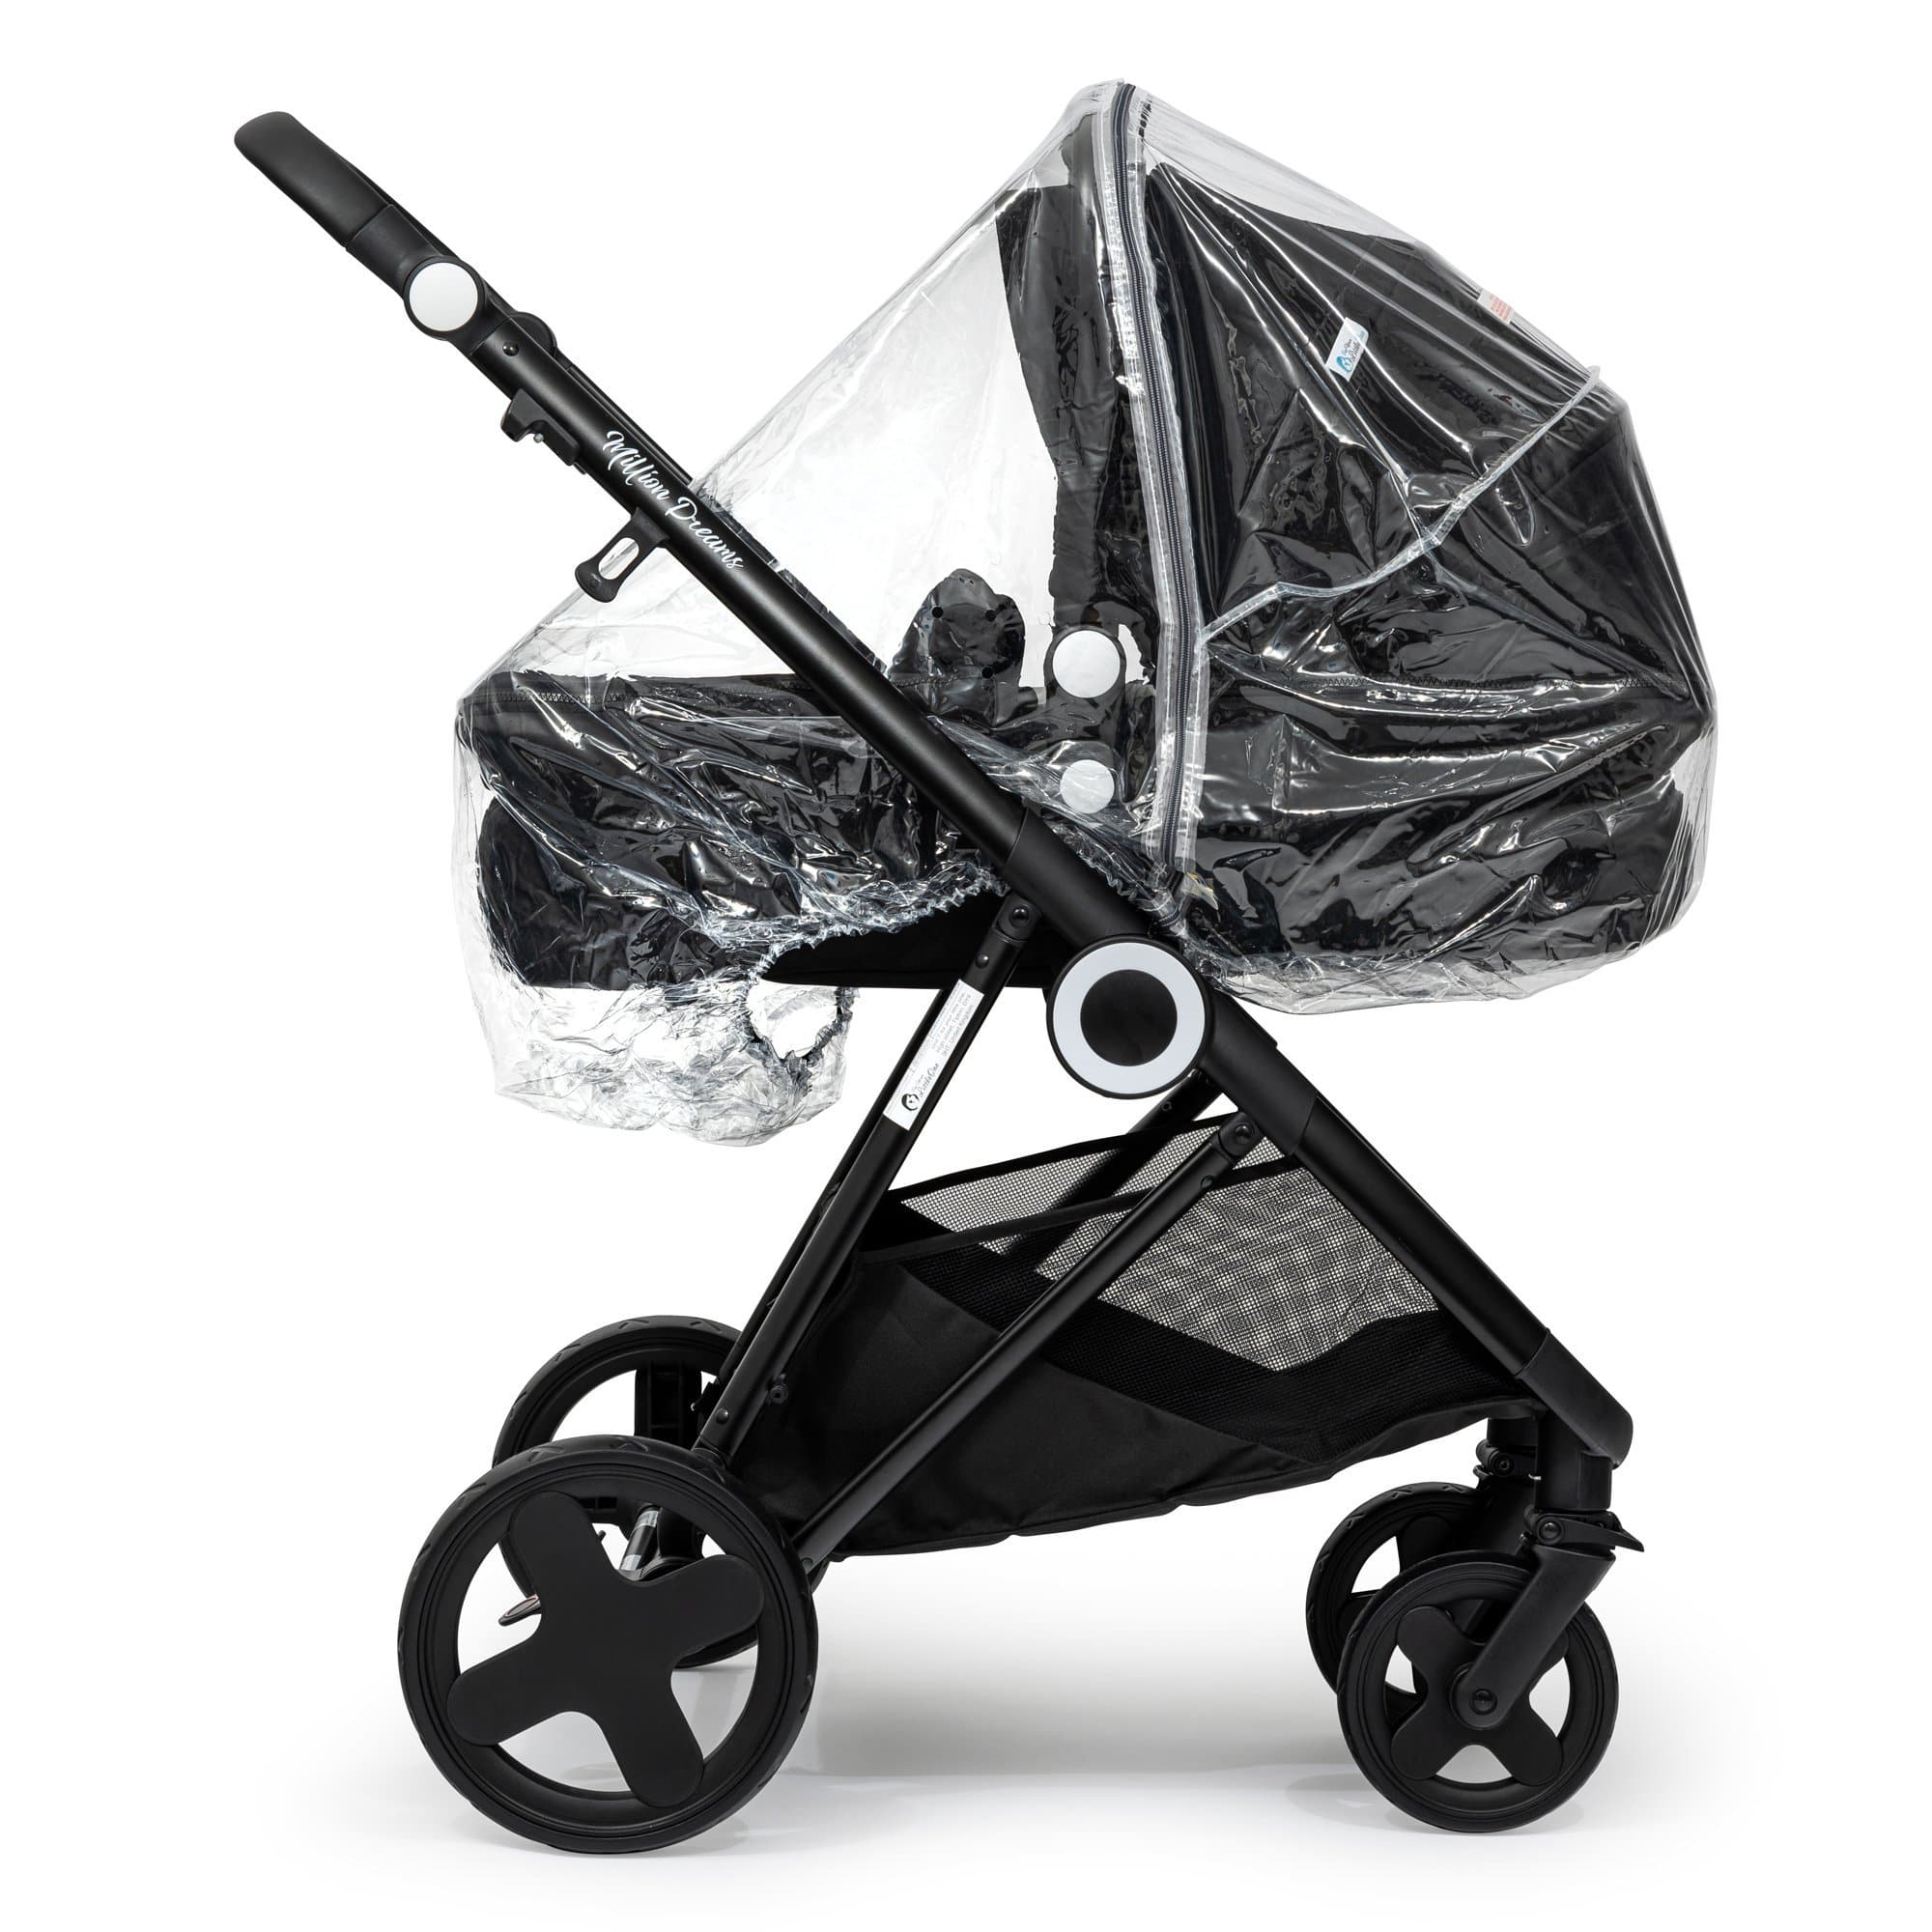 2 in 1 Rain Cover Compatible with Bugaboo - Fits All Models - For Your Little One